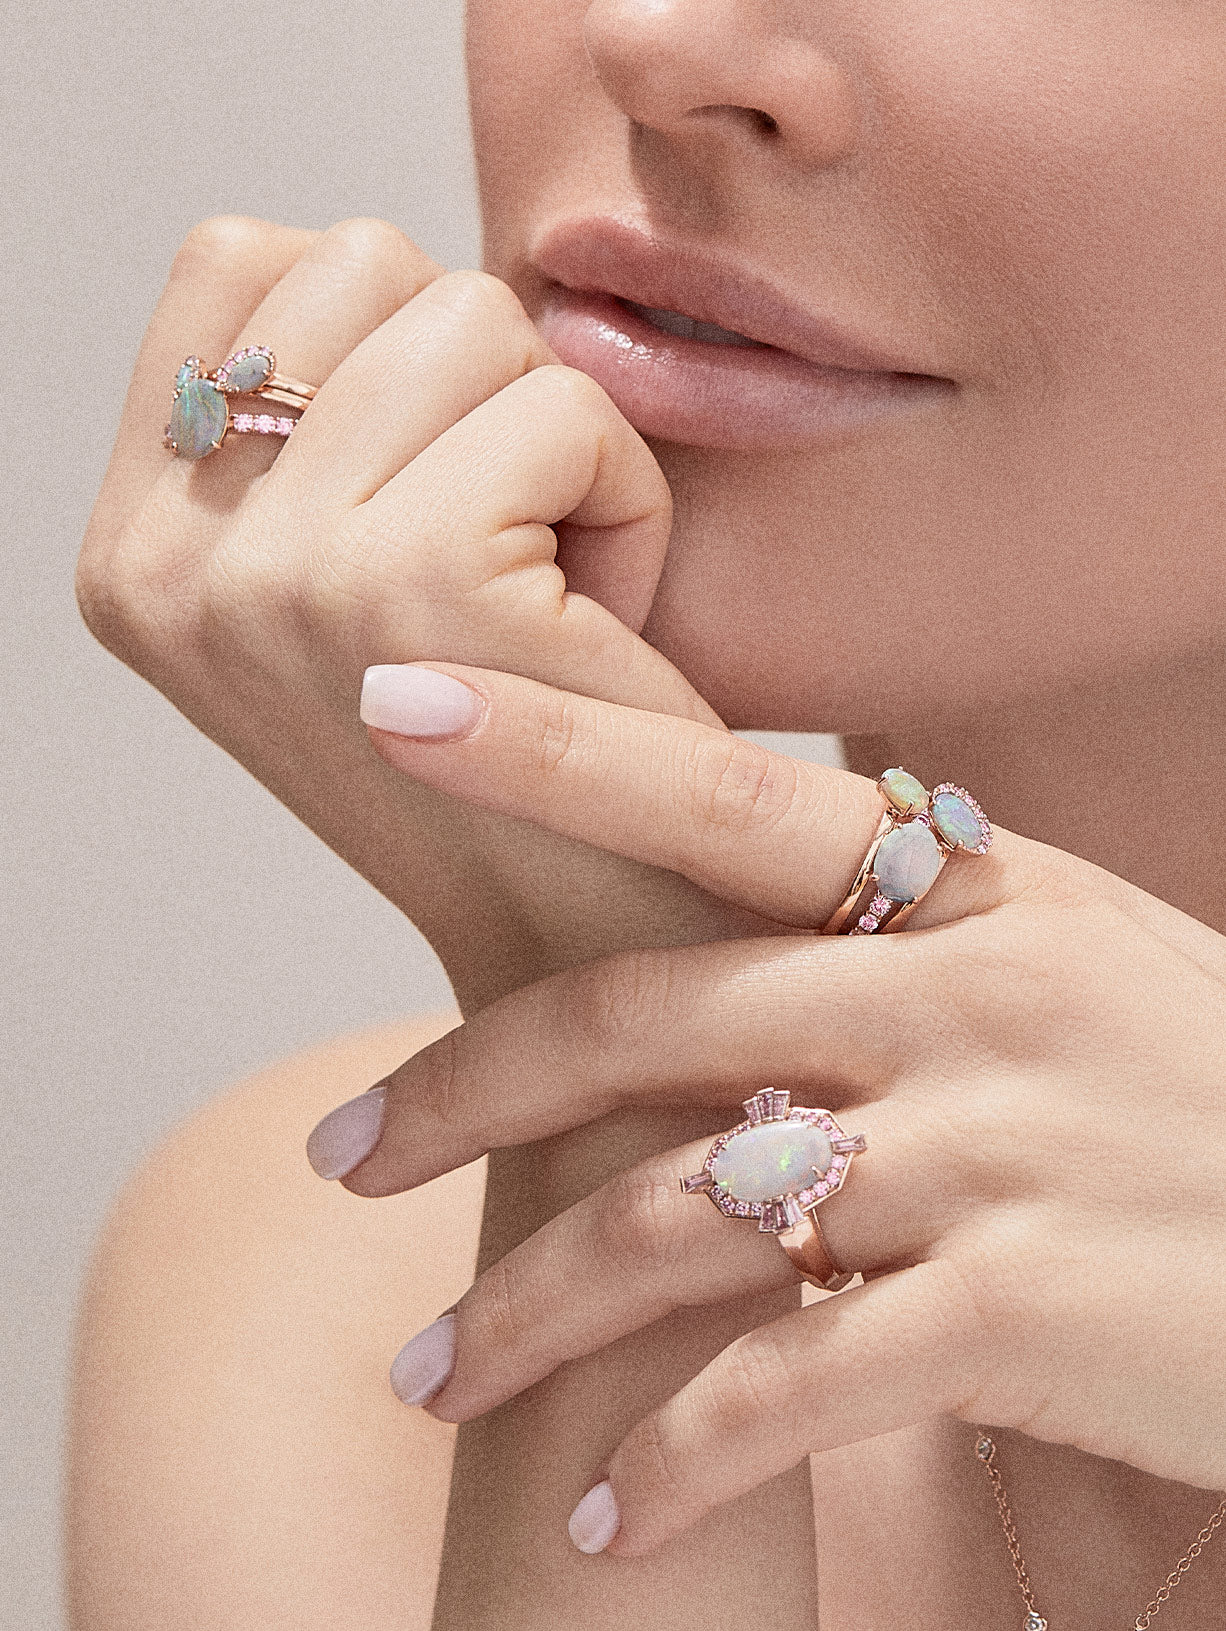 Argyle Pink™ Diamond and Opal Stacking Ring - Pink Diamonds, J FINE - J Fine, Rings - Pink Diamond Jewelry, argyle-pink™-diamond-and-opal-stacking-ring-by-j-fine-3 - Argyle Pink Diamonds